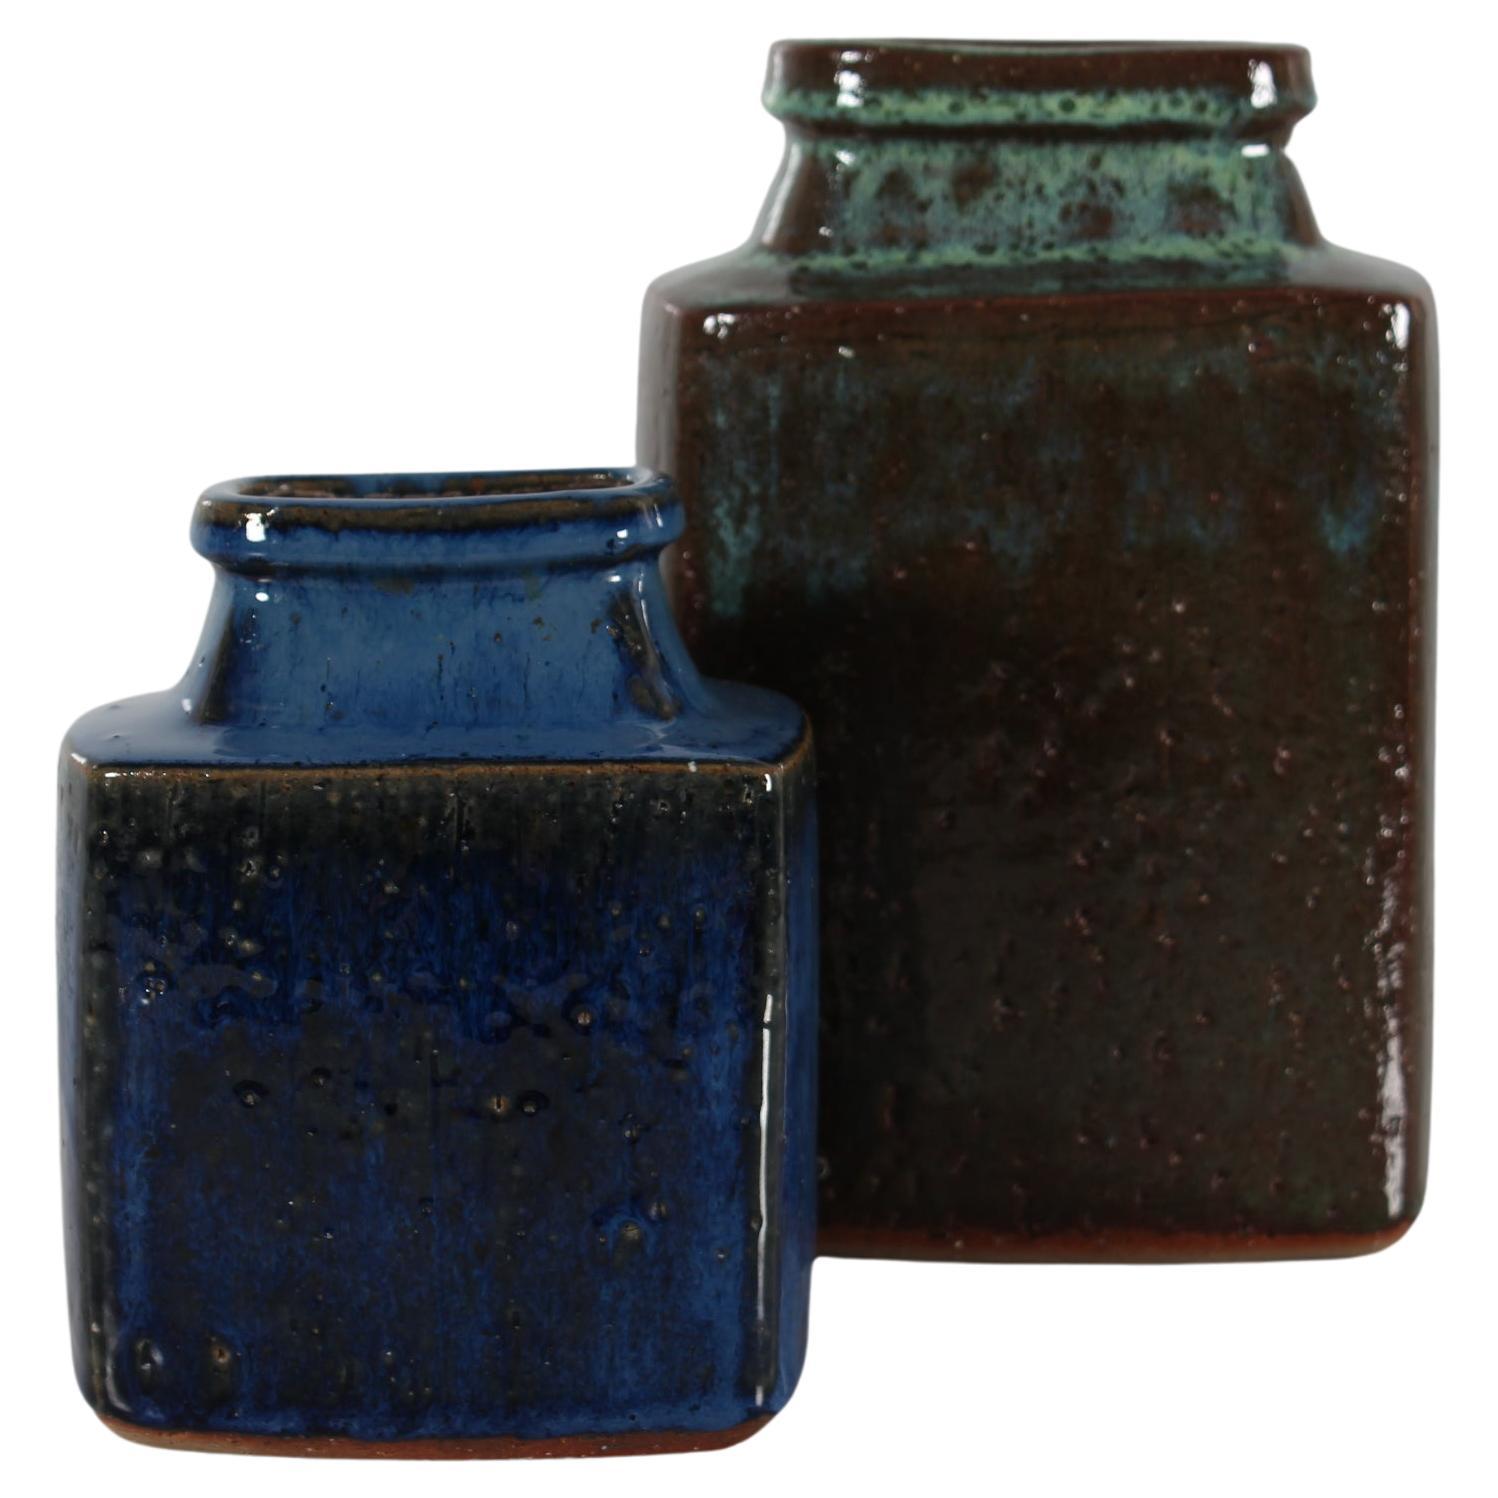 Pair of mid-century Danish brutalist style square vases by ceramist and artist Jytte Trebbien handmade in the 1970´s. 
The rustic vases are made of chamotte clay which gives a rough and vivid surface. The large vase has a glossy greenish-brown